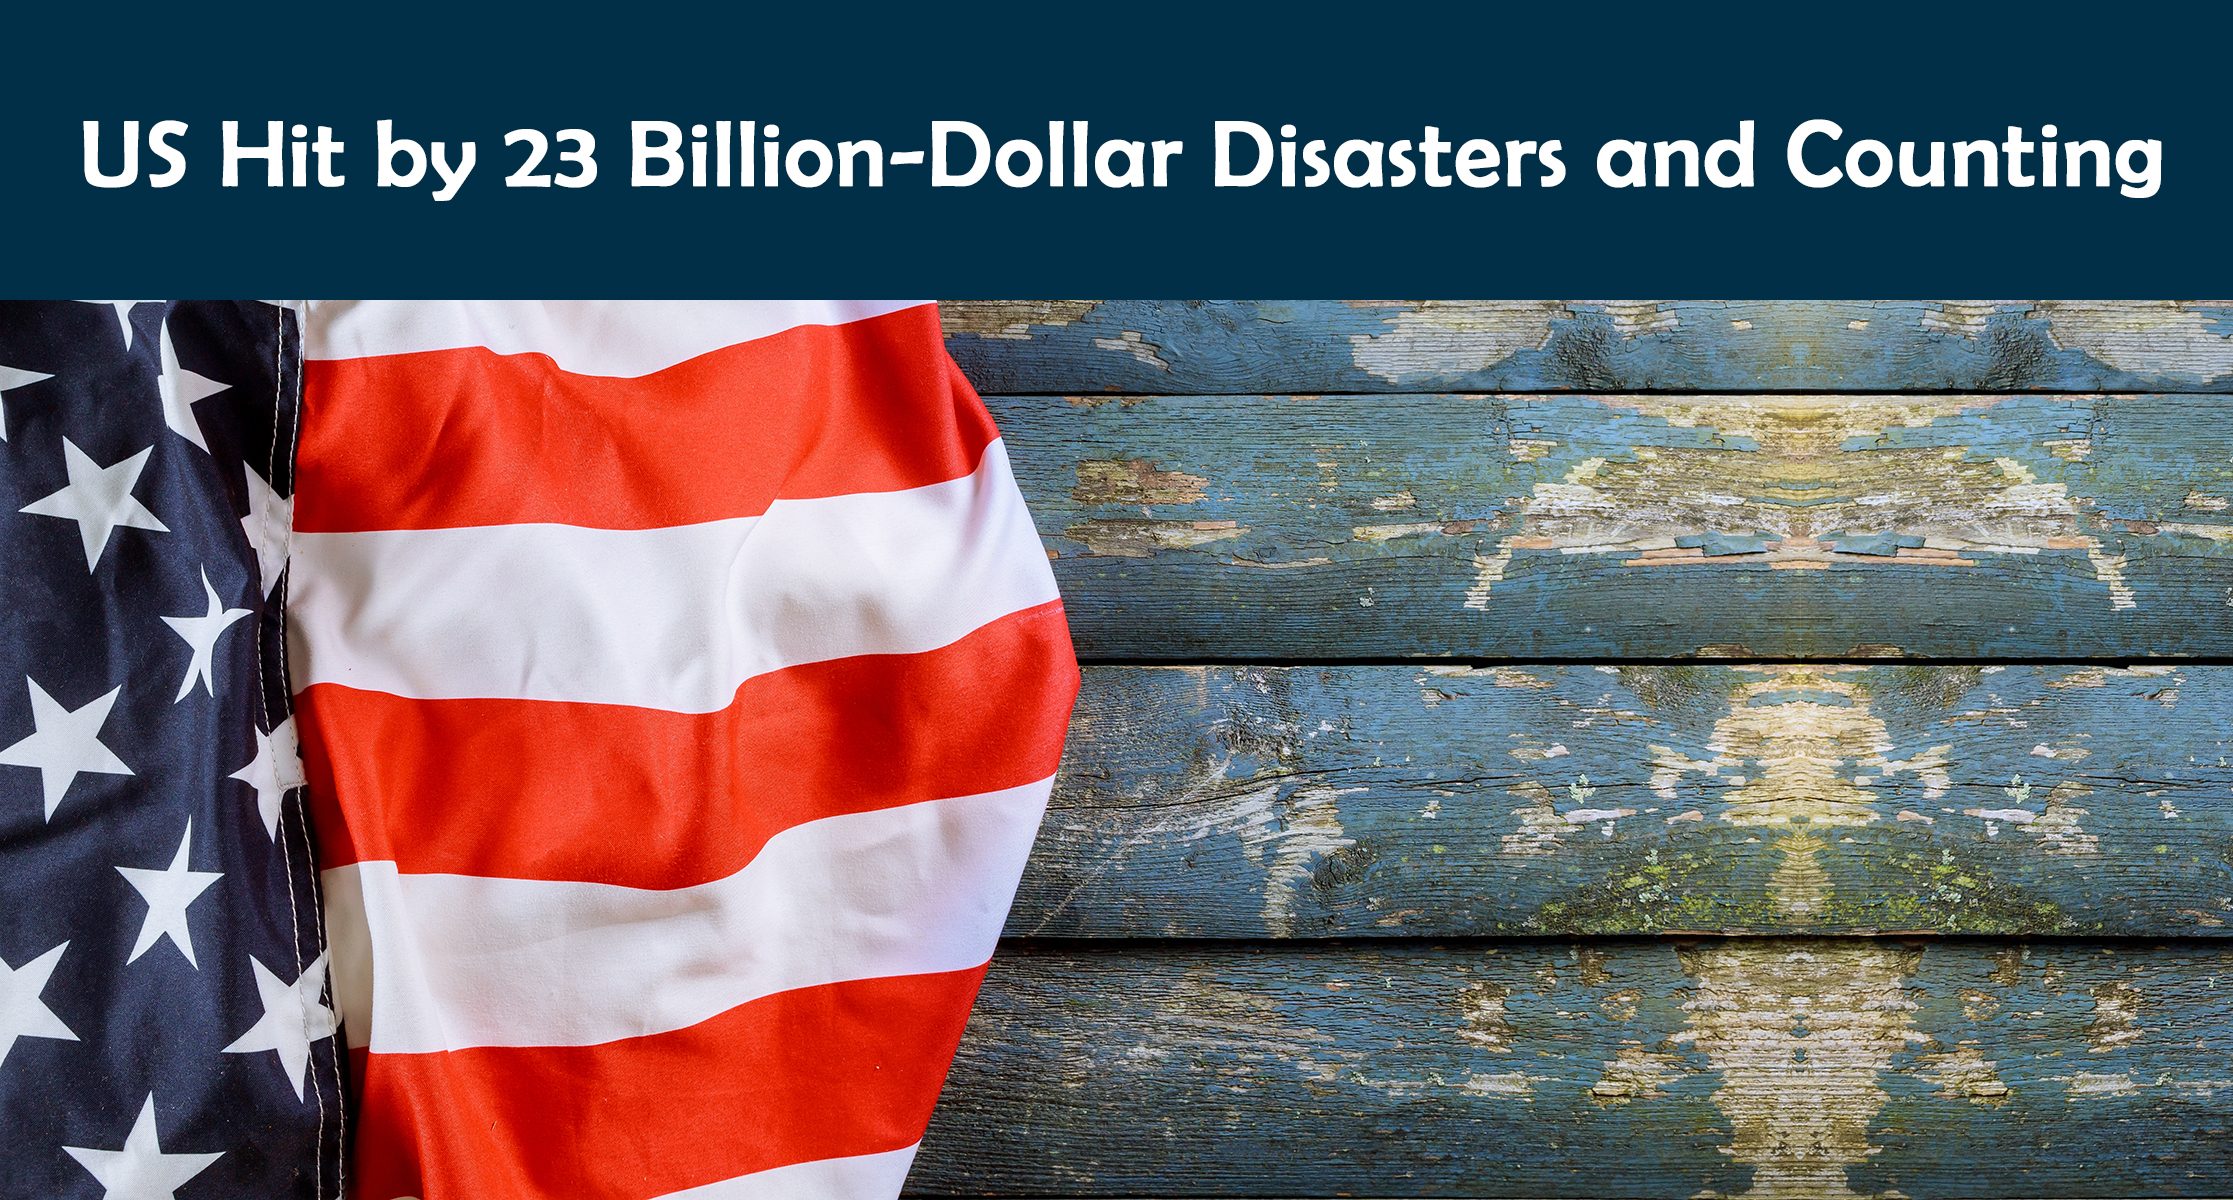 US Hit by 23 Billion-Dollar Disasters and Counting